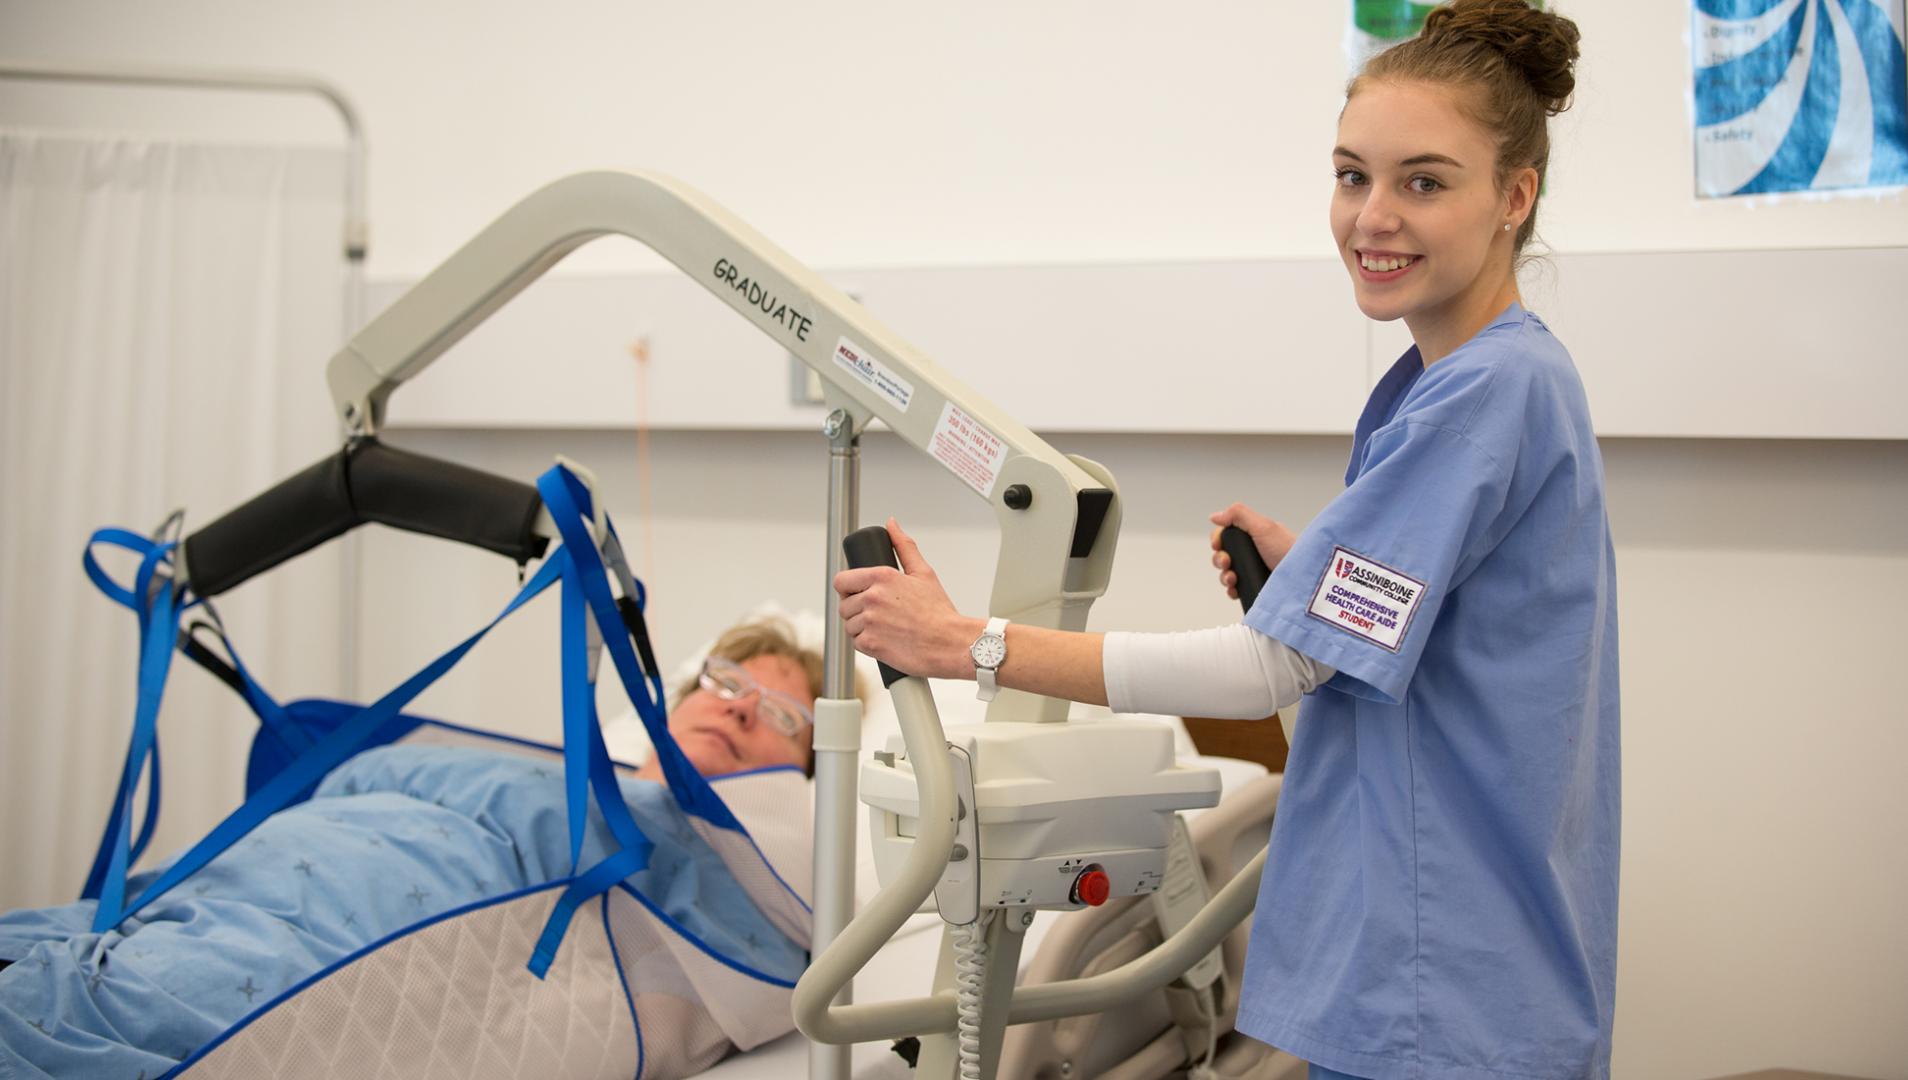 Comprehensive Health Care Aide student working with a patient